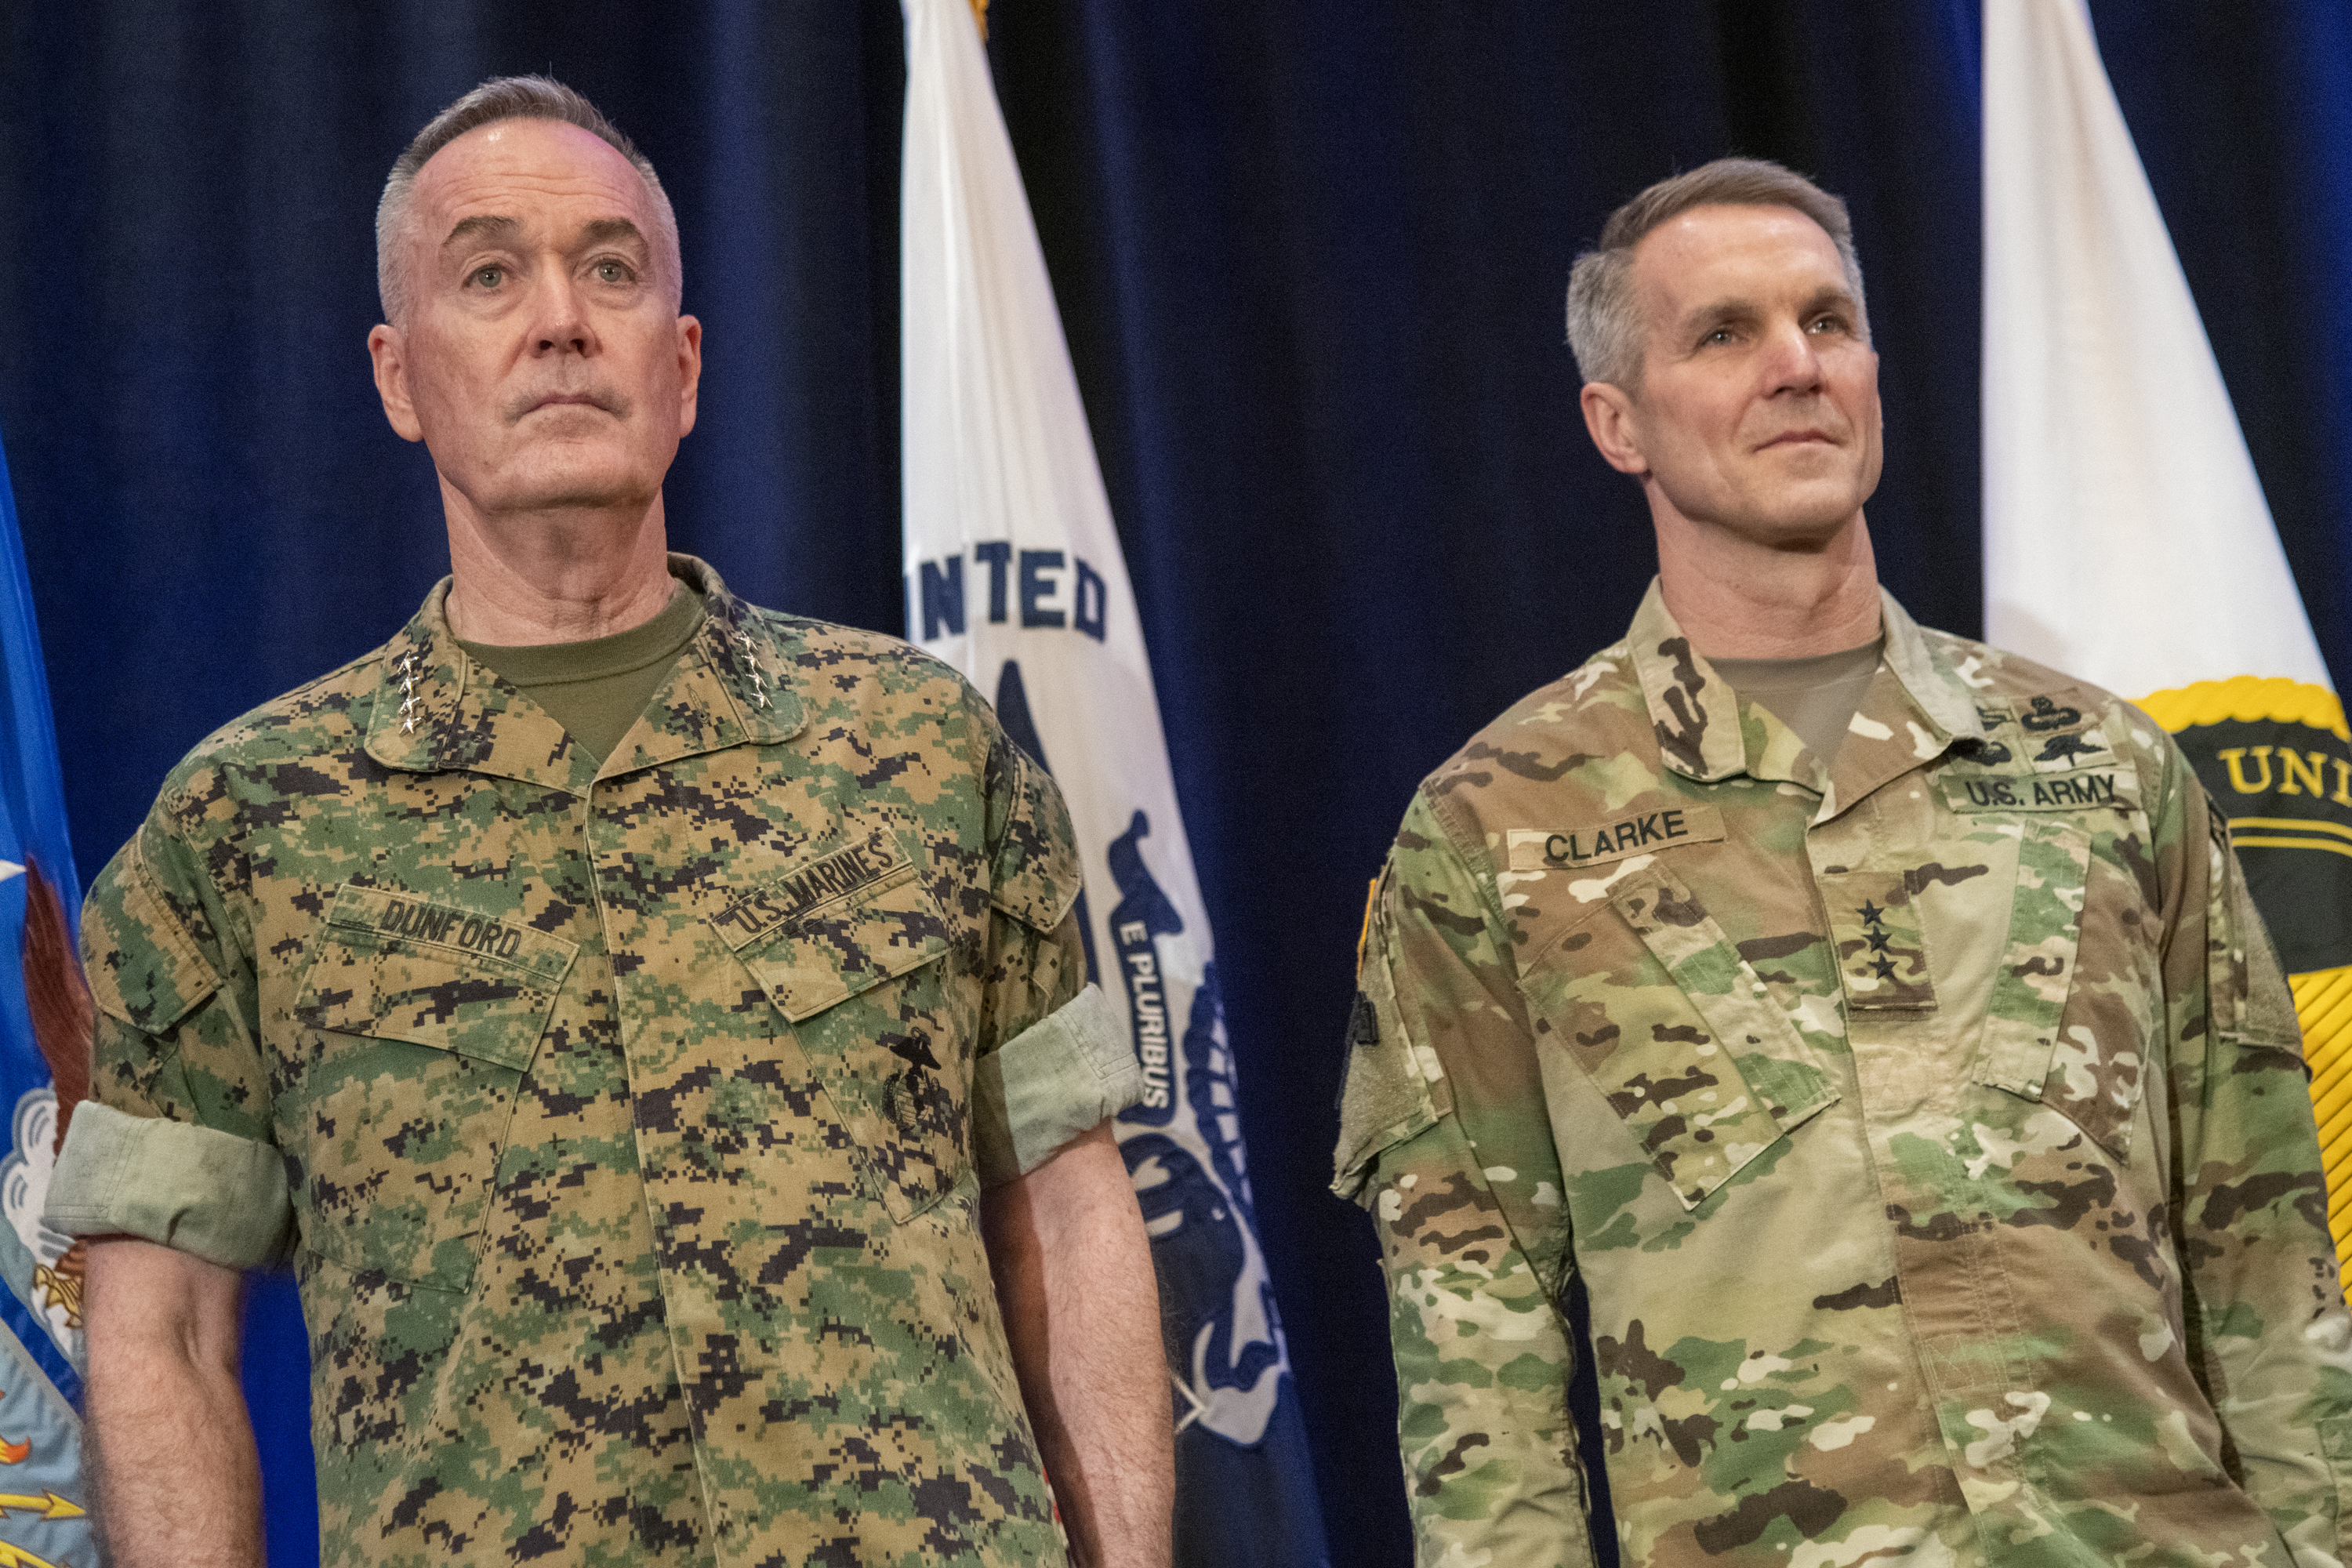 File:Clarke Promoted to General, Ahead of Taking Command of SOCOM 190329-D-PB383-017  (47443457412).jpg - Wikipedia